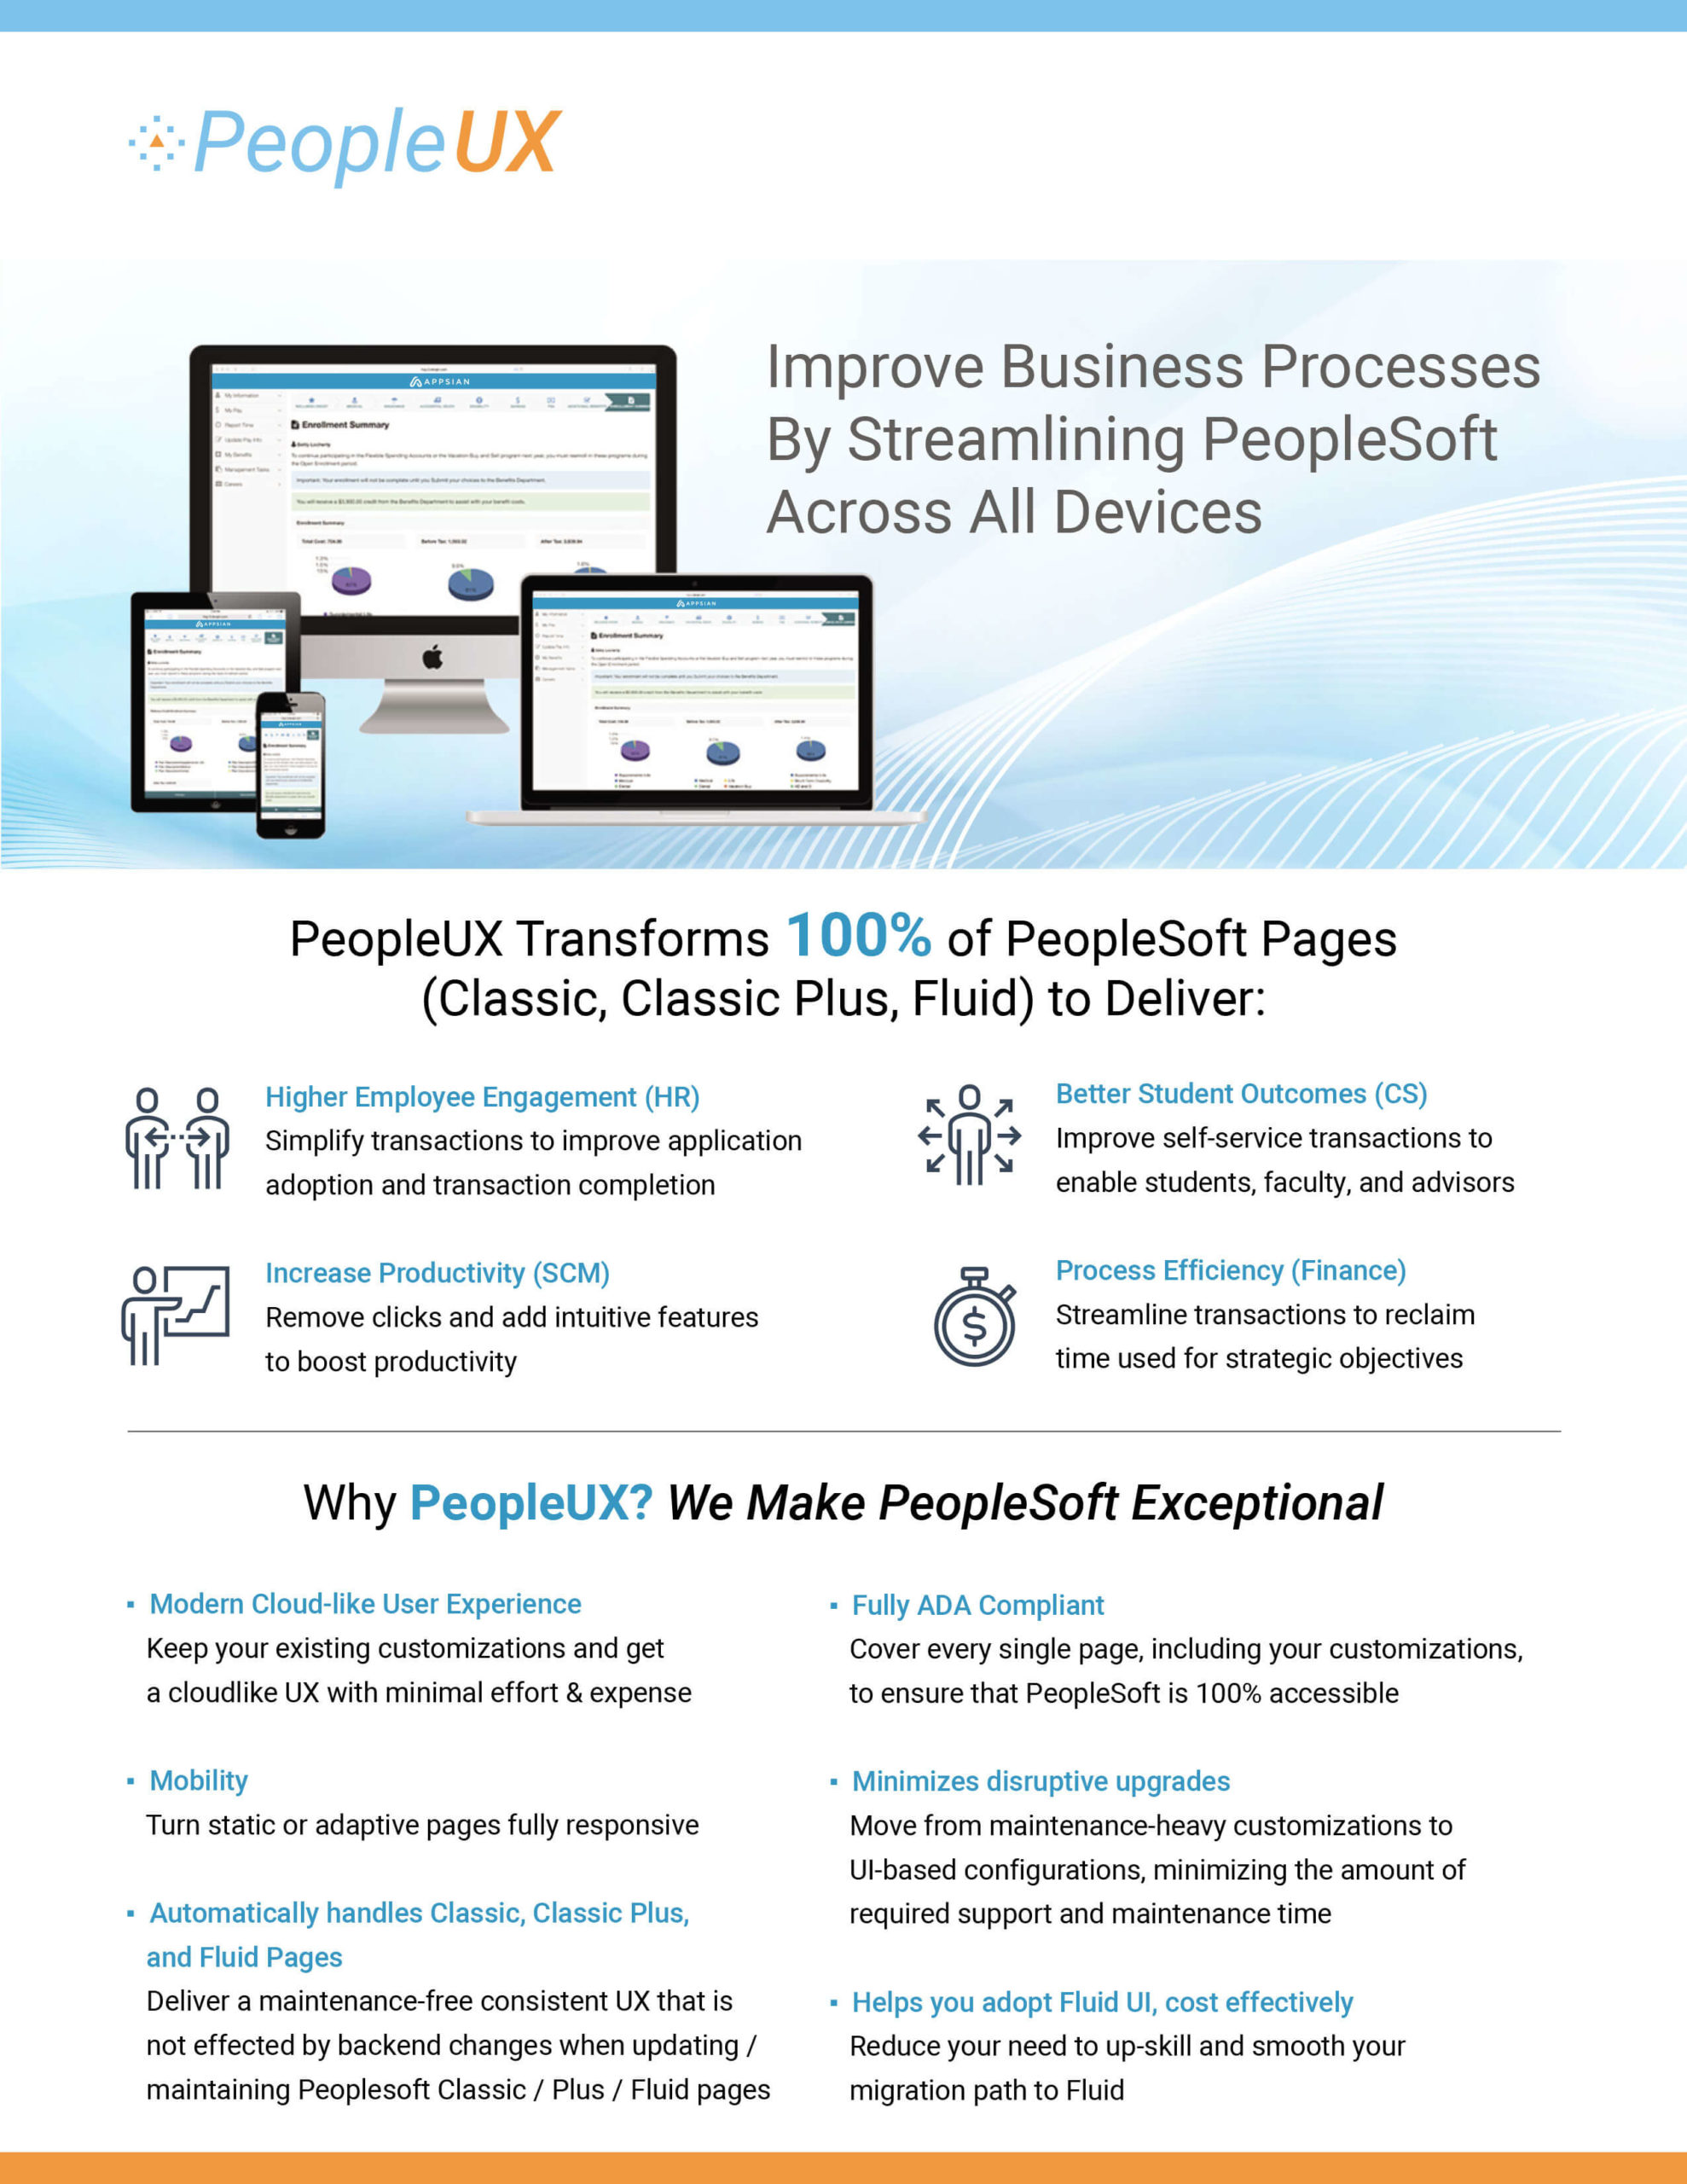 Improve Business Processes By Streamlining PeopleSoft Across All Devices